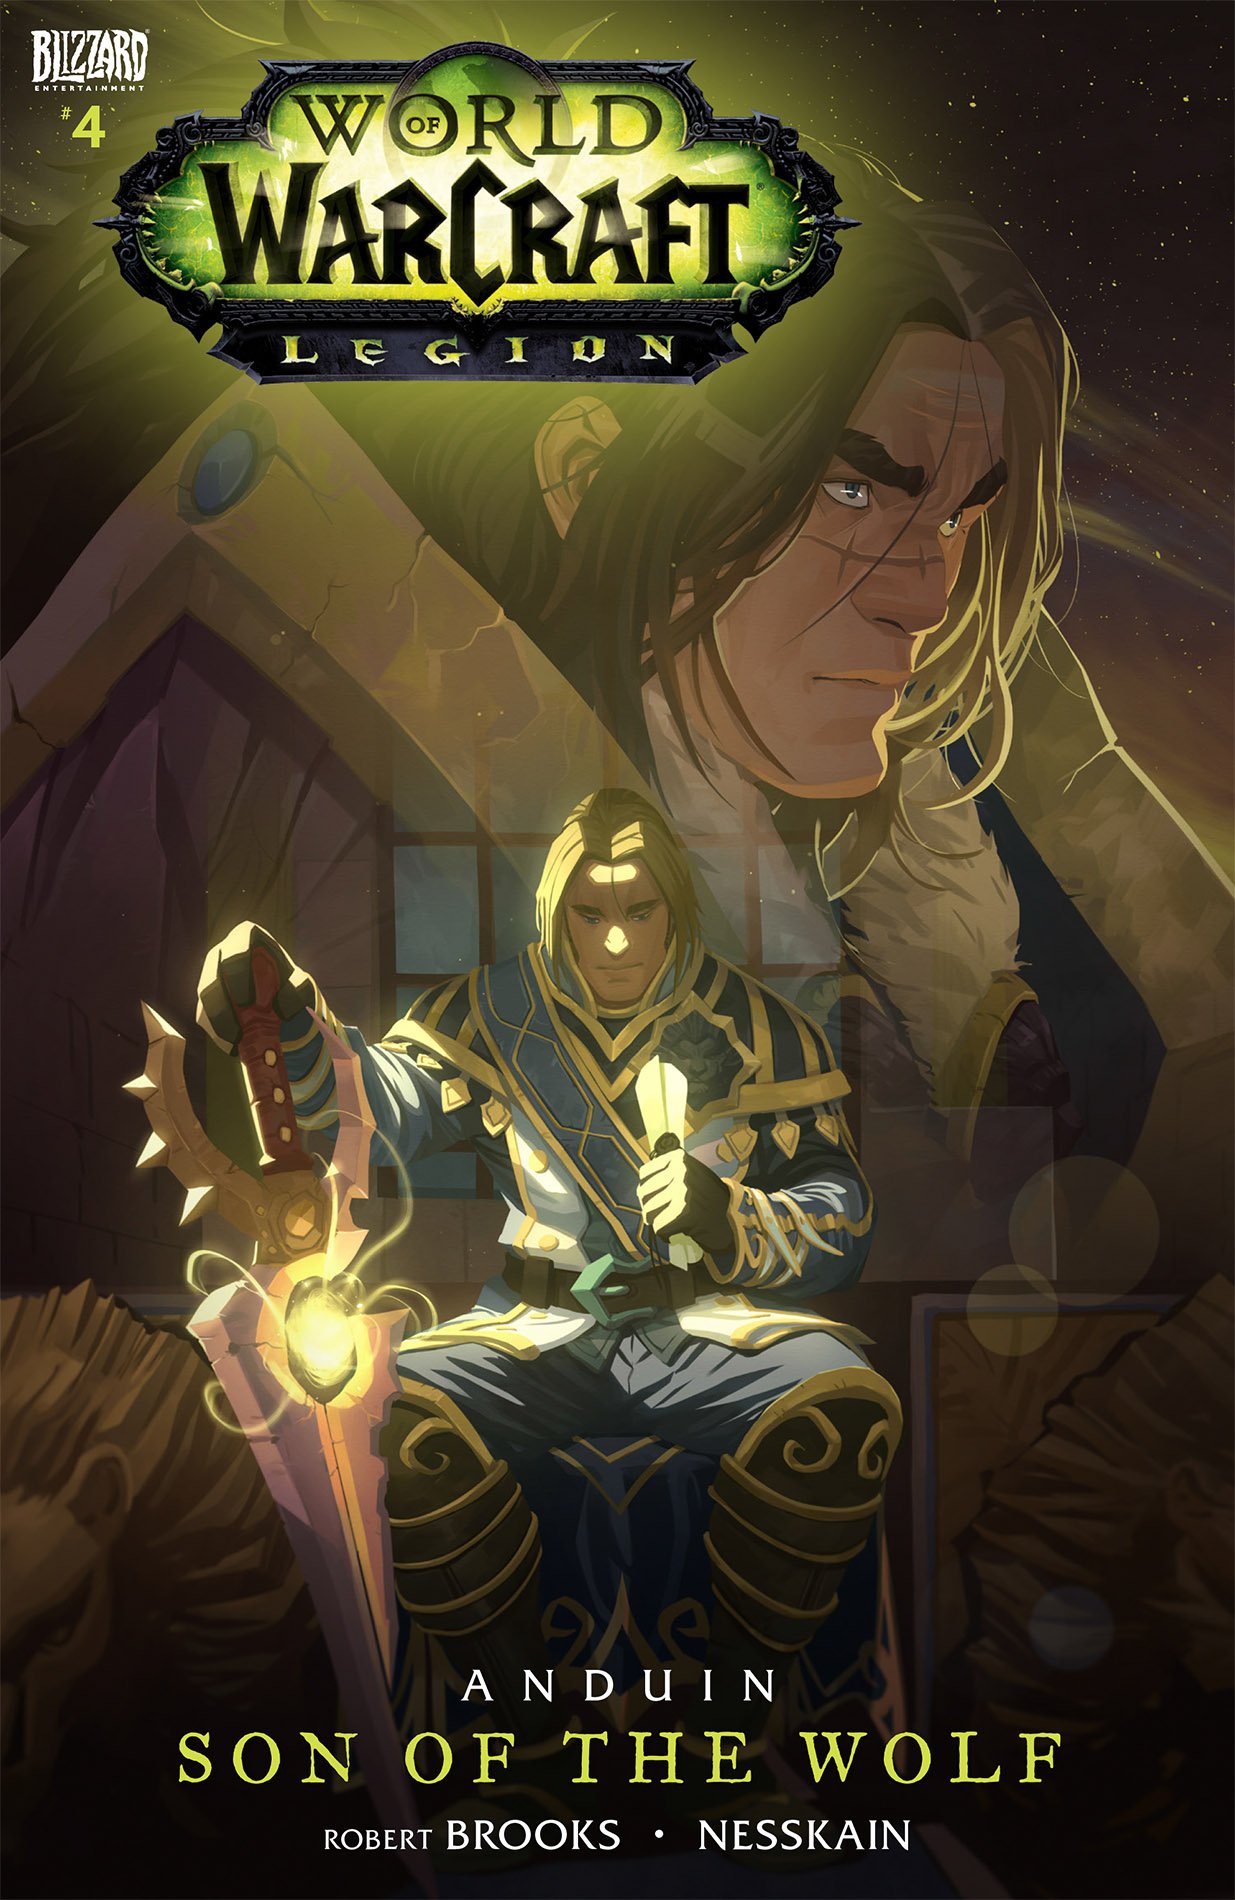 World of Warcraft - Legion 04 - Anduin: Son of the Wolf (July 2016)